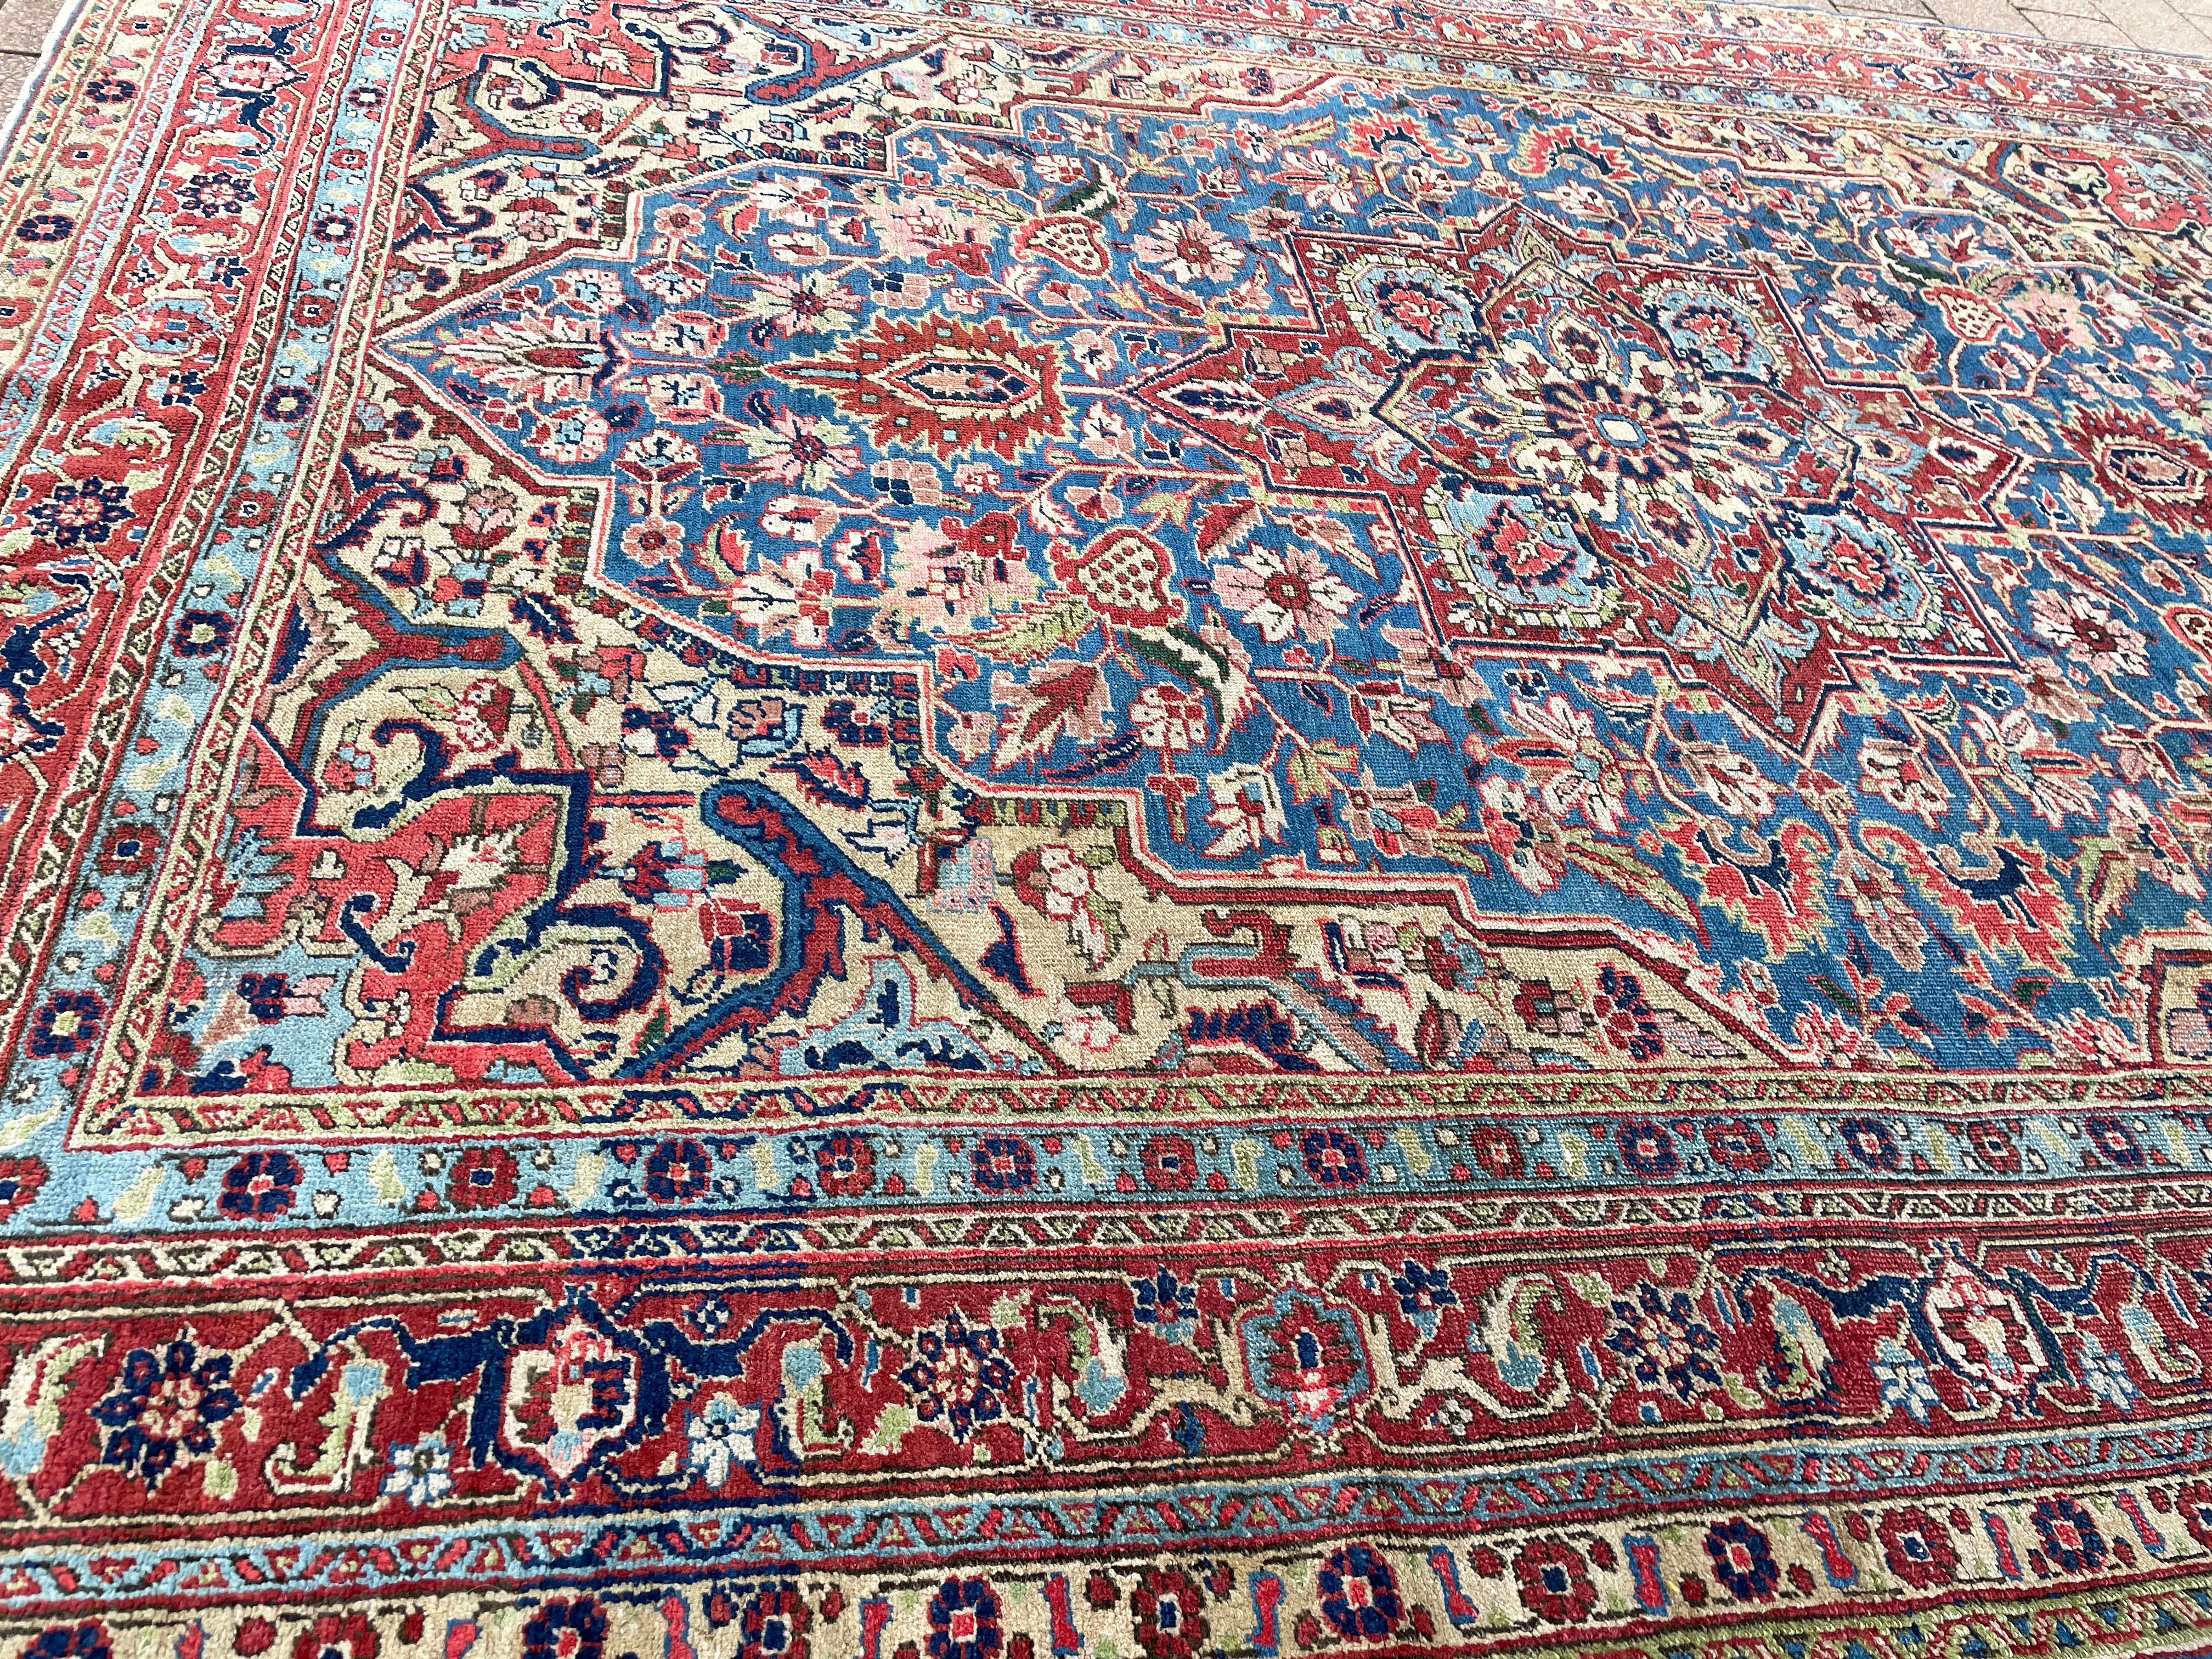  Antique Persian Heriz/Serapi,  hailing from the Iranian province of Eastern Azerbaijan and the encompassing Heriz region,  hold a rich tapestry of history and craftsmanship. The village of Serab, nestled to the south of the Heriz region in North